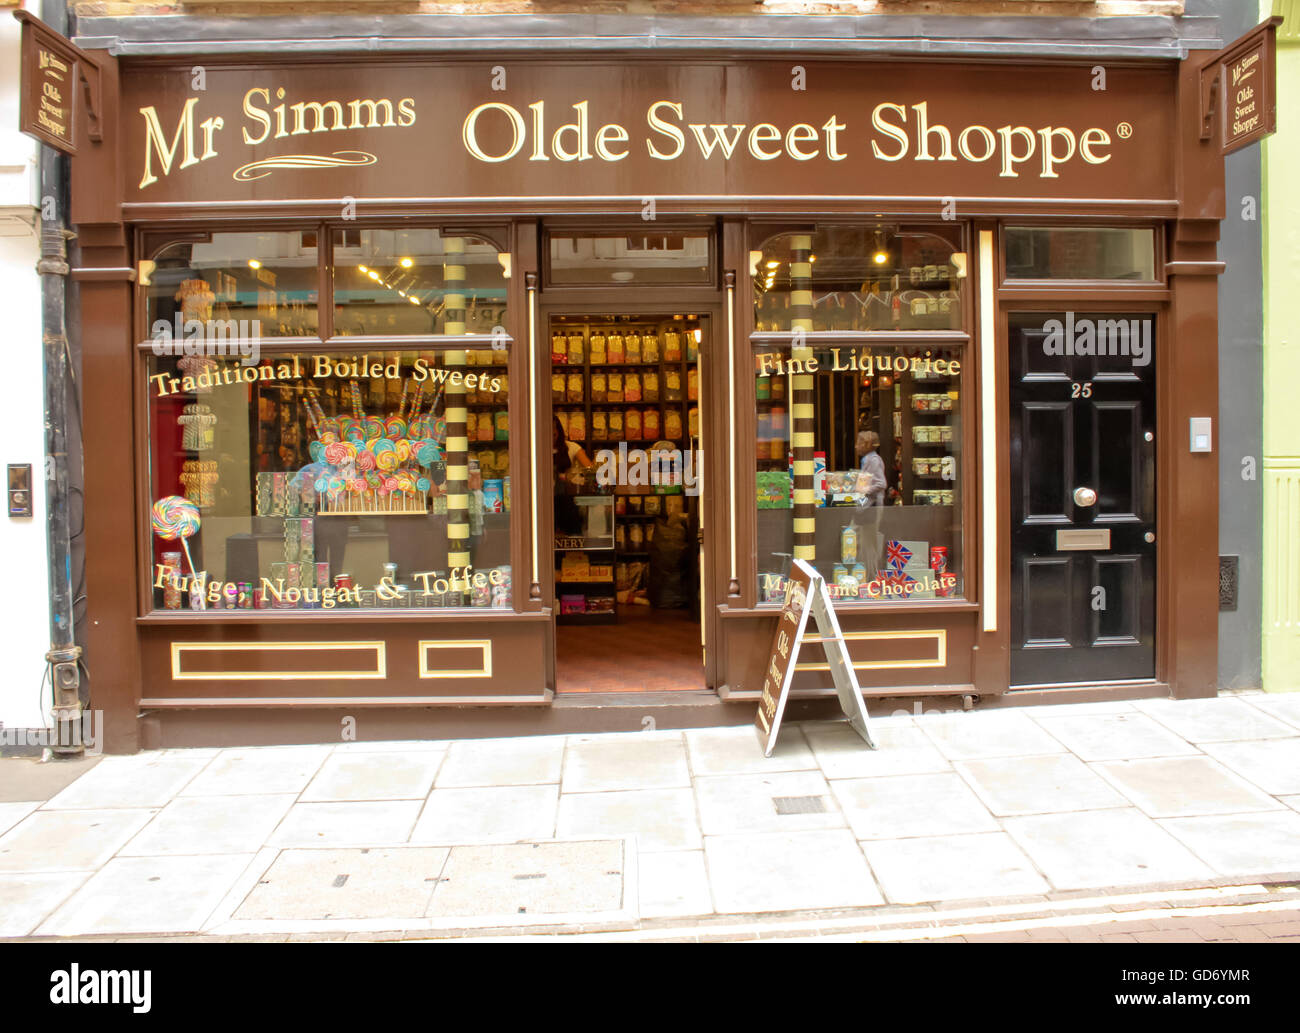 London, Uk - August 17, 2010: outside view of an oldstyle sweet shop Stock Photo: 111406199 - Alamy